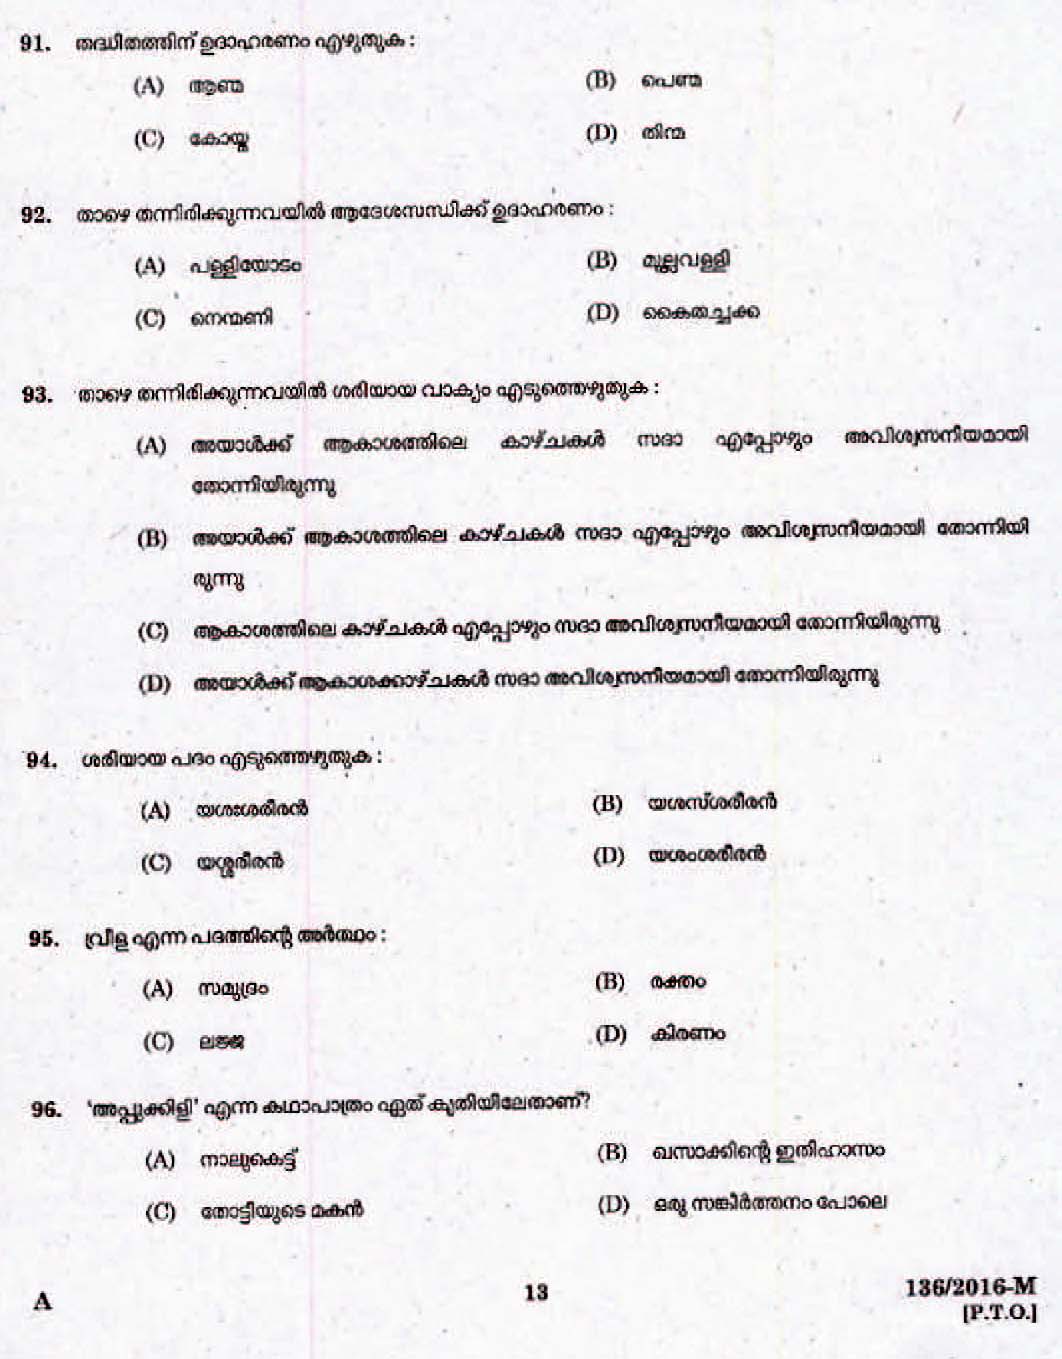 LD Clerk Question Paper Malayalam 2016 Paper Code 1362016 M 11